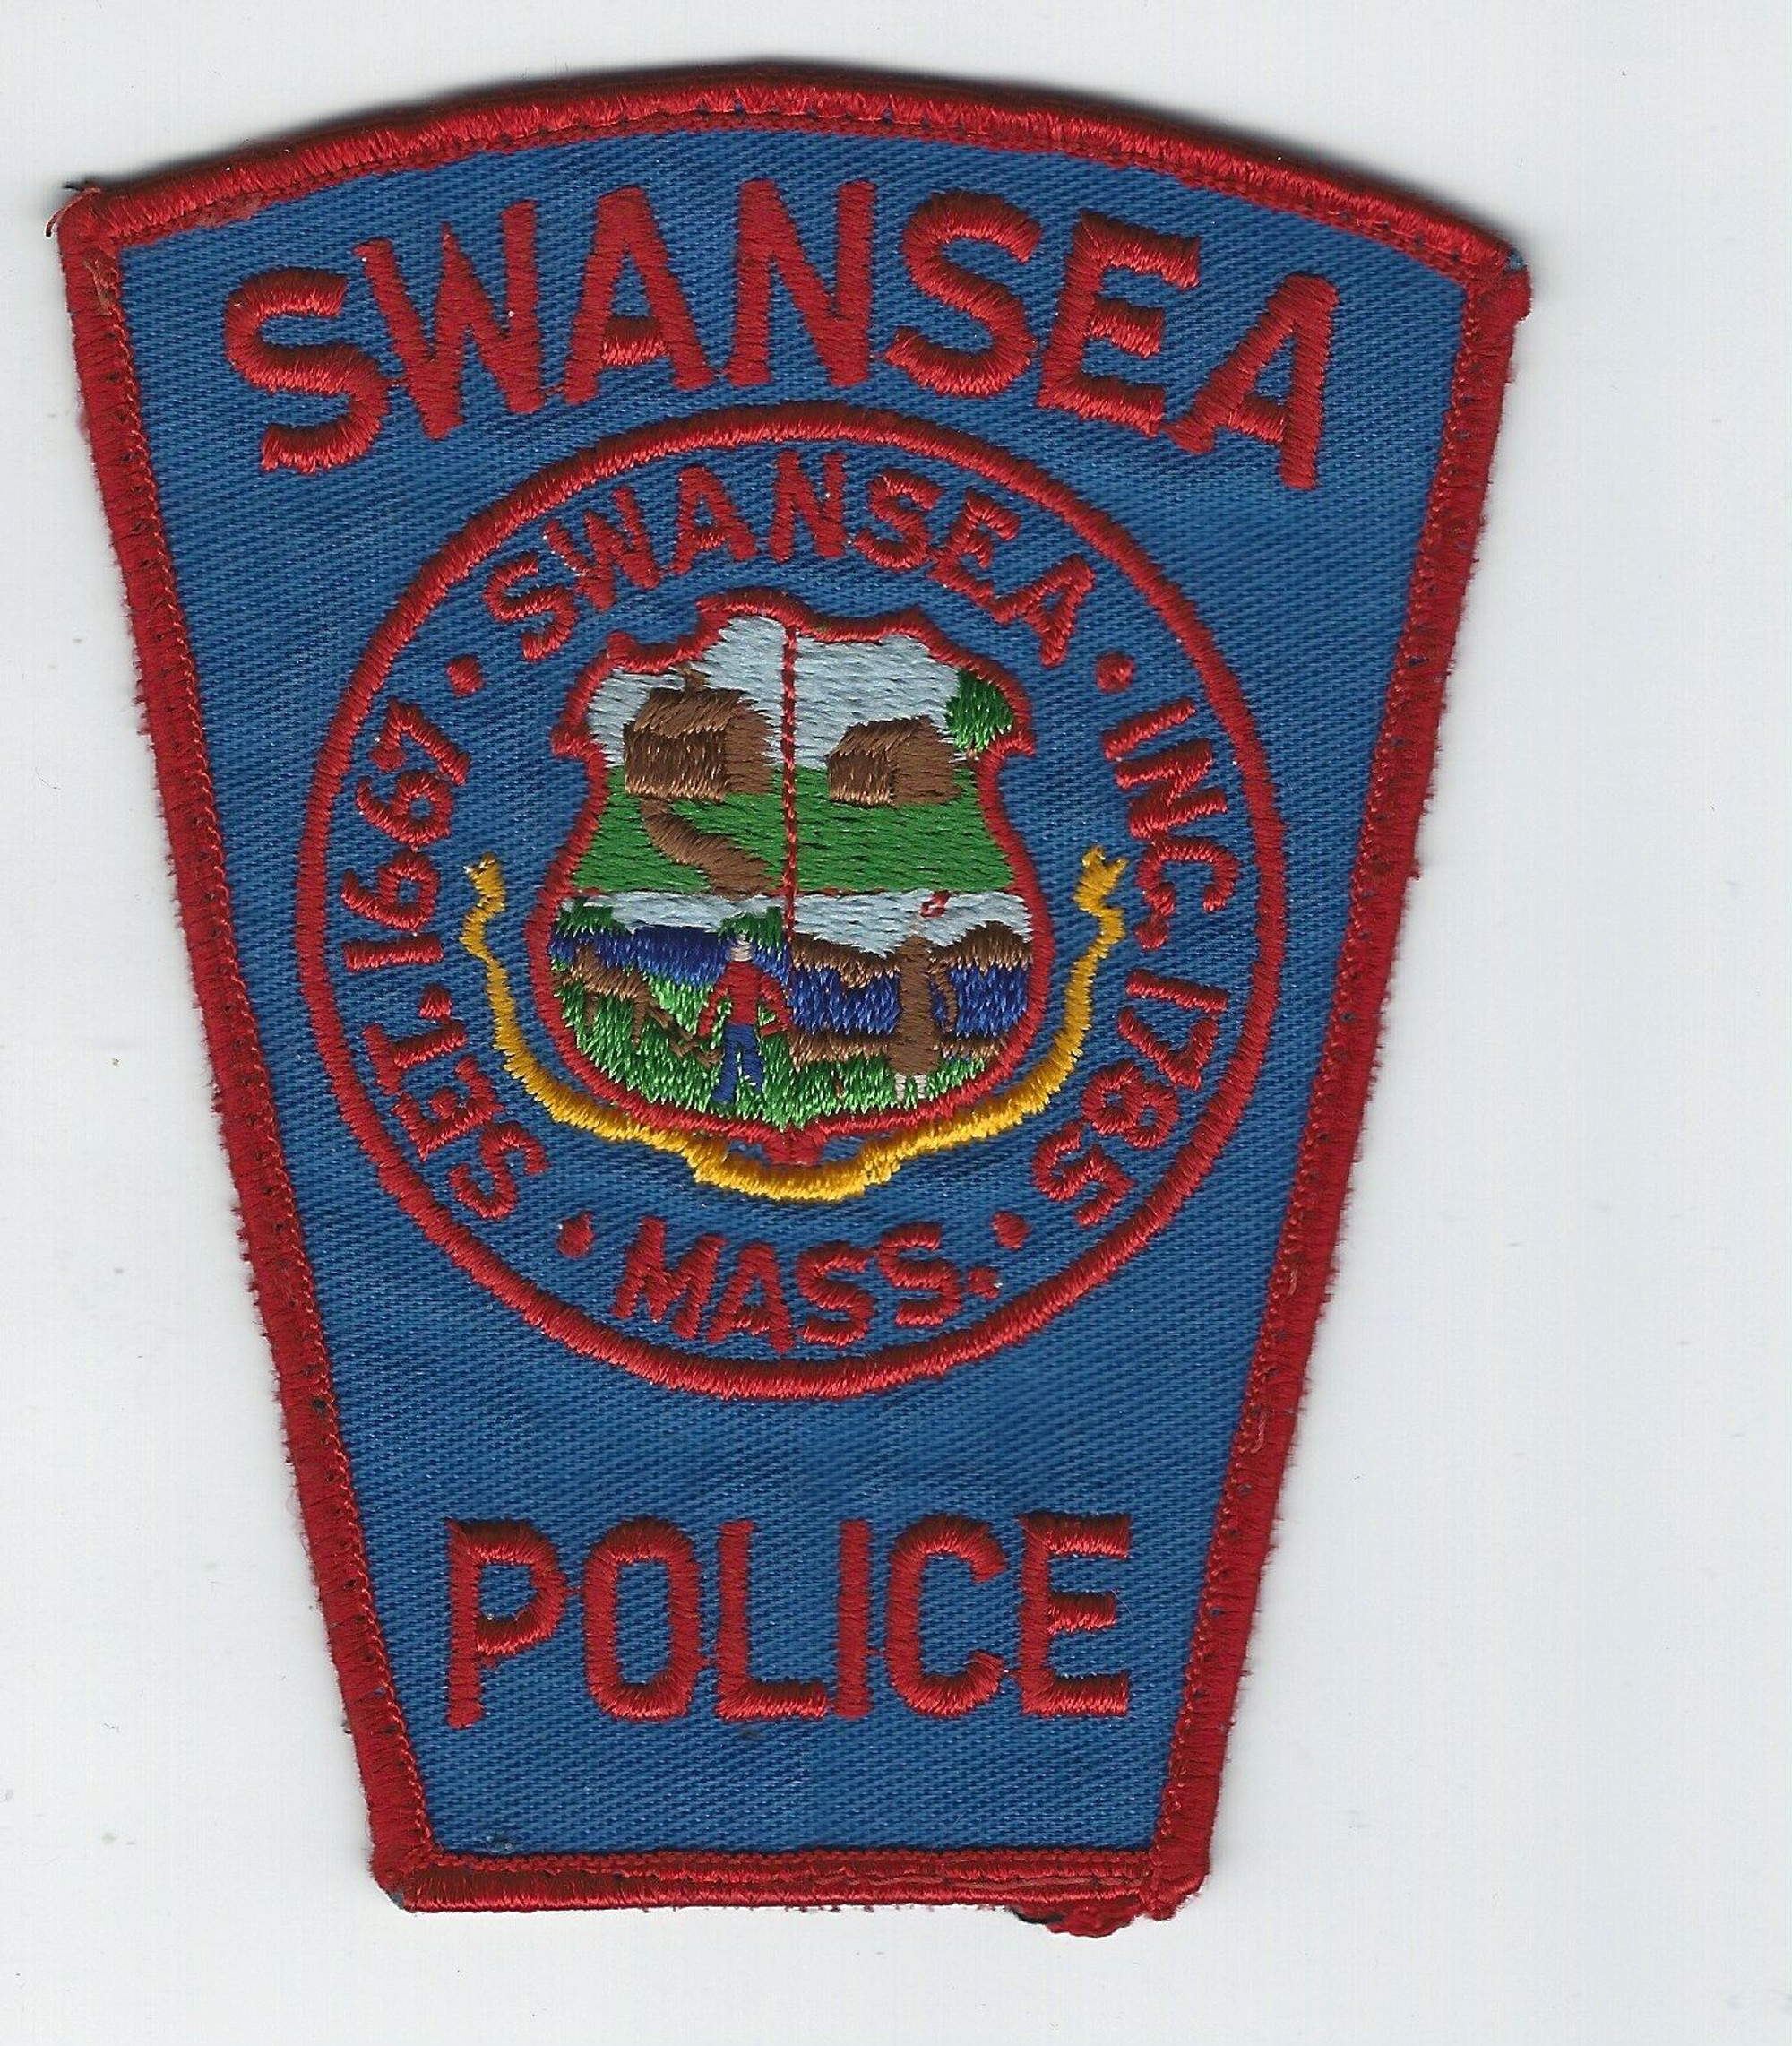 Swansea MA Police Patch